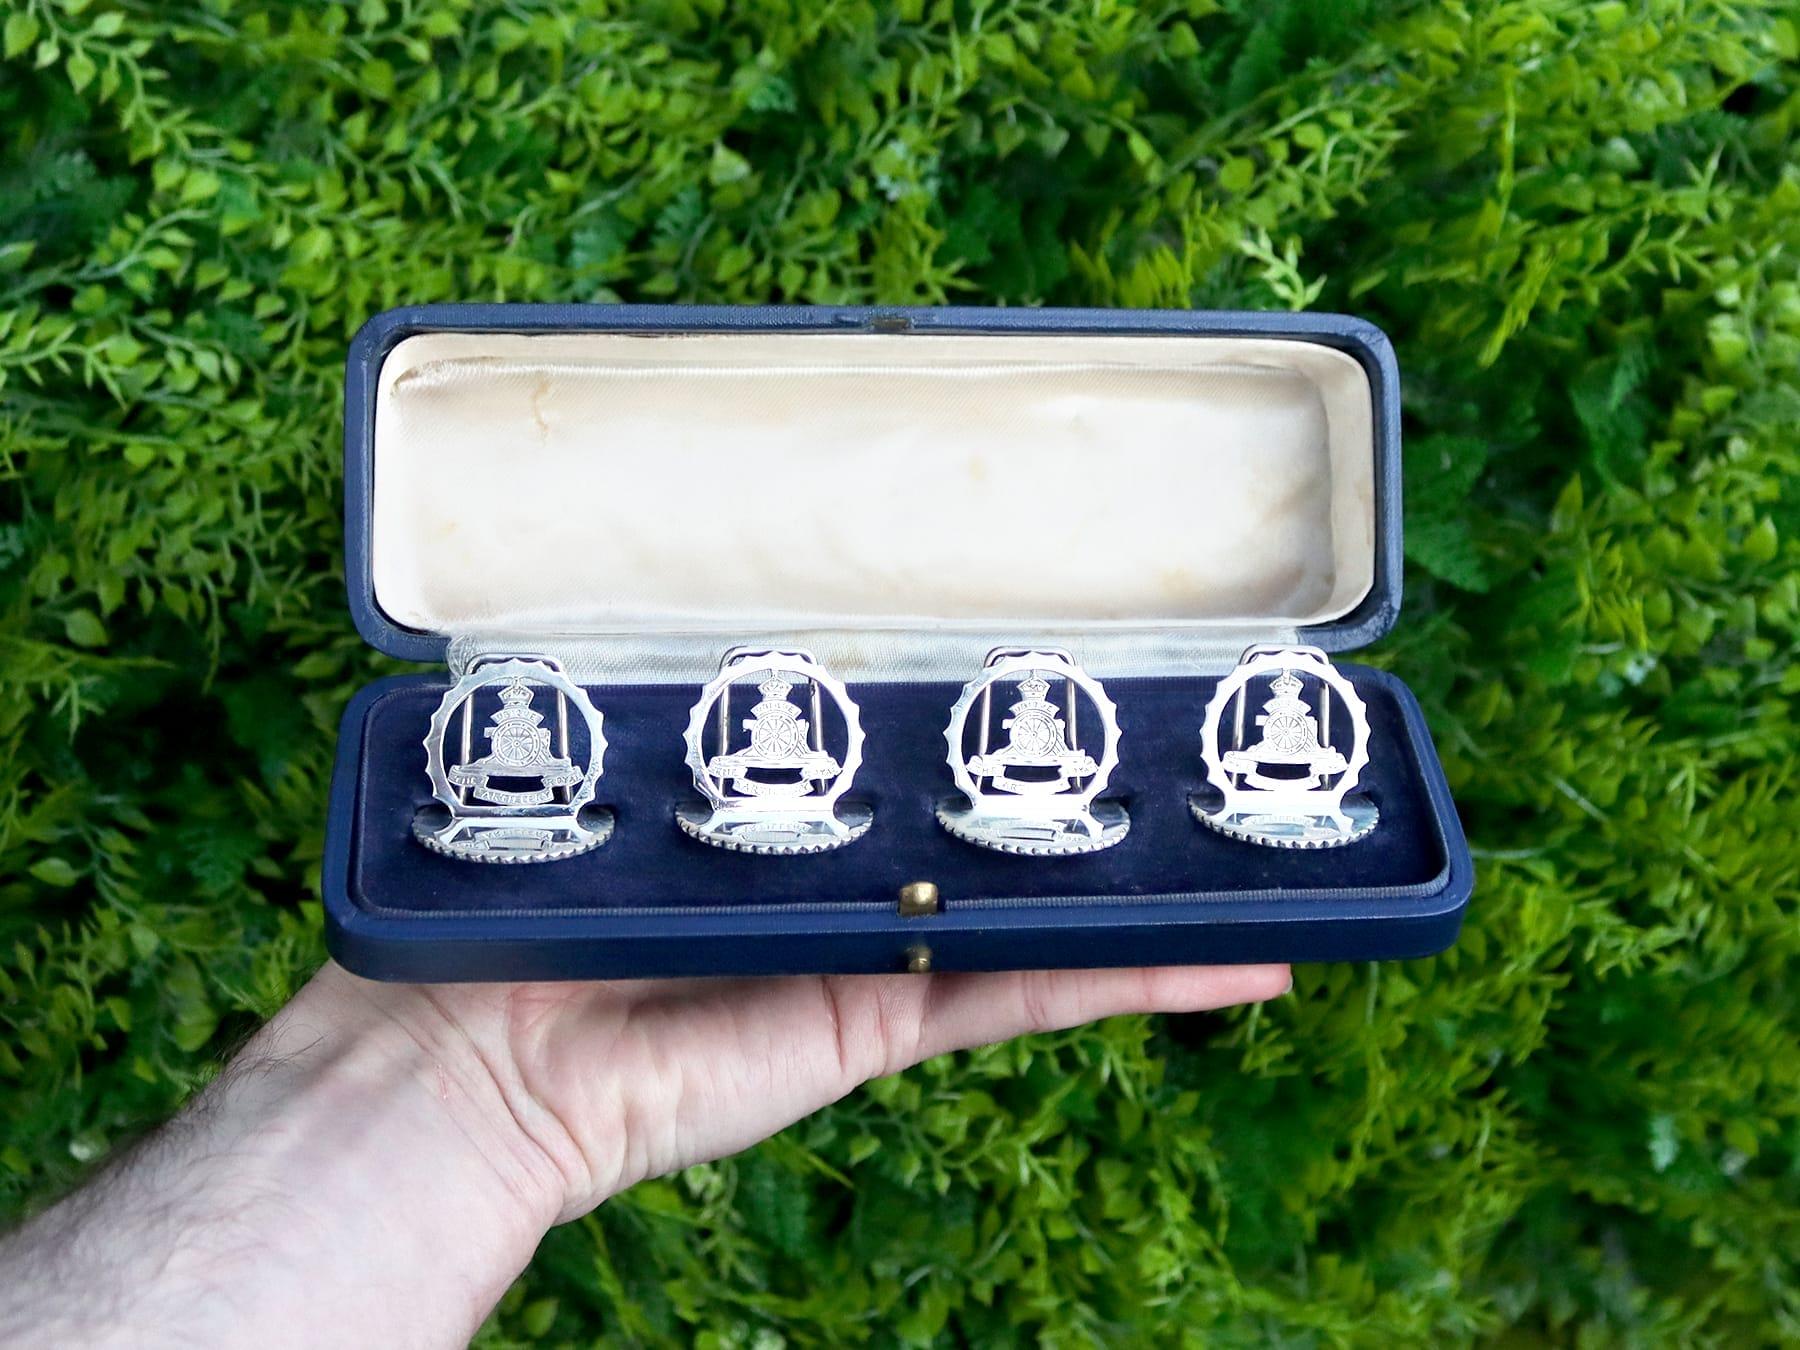 An exceptional, fine and impressive set of four antique George V English sterling silver Royal Artillery menu holders, boxed, an addition to our 1930s silverware collection.

These exceptional George V cast sterling silver menu holders have a